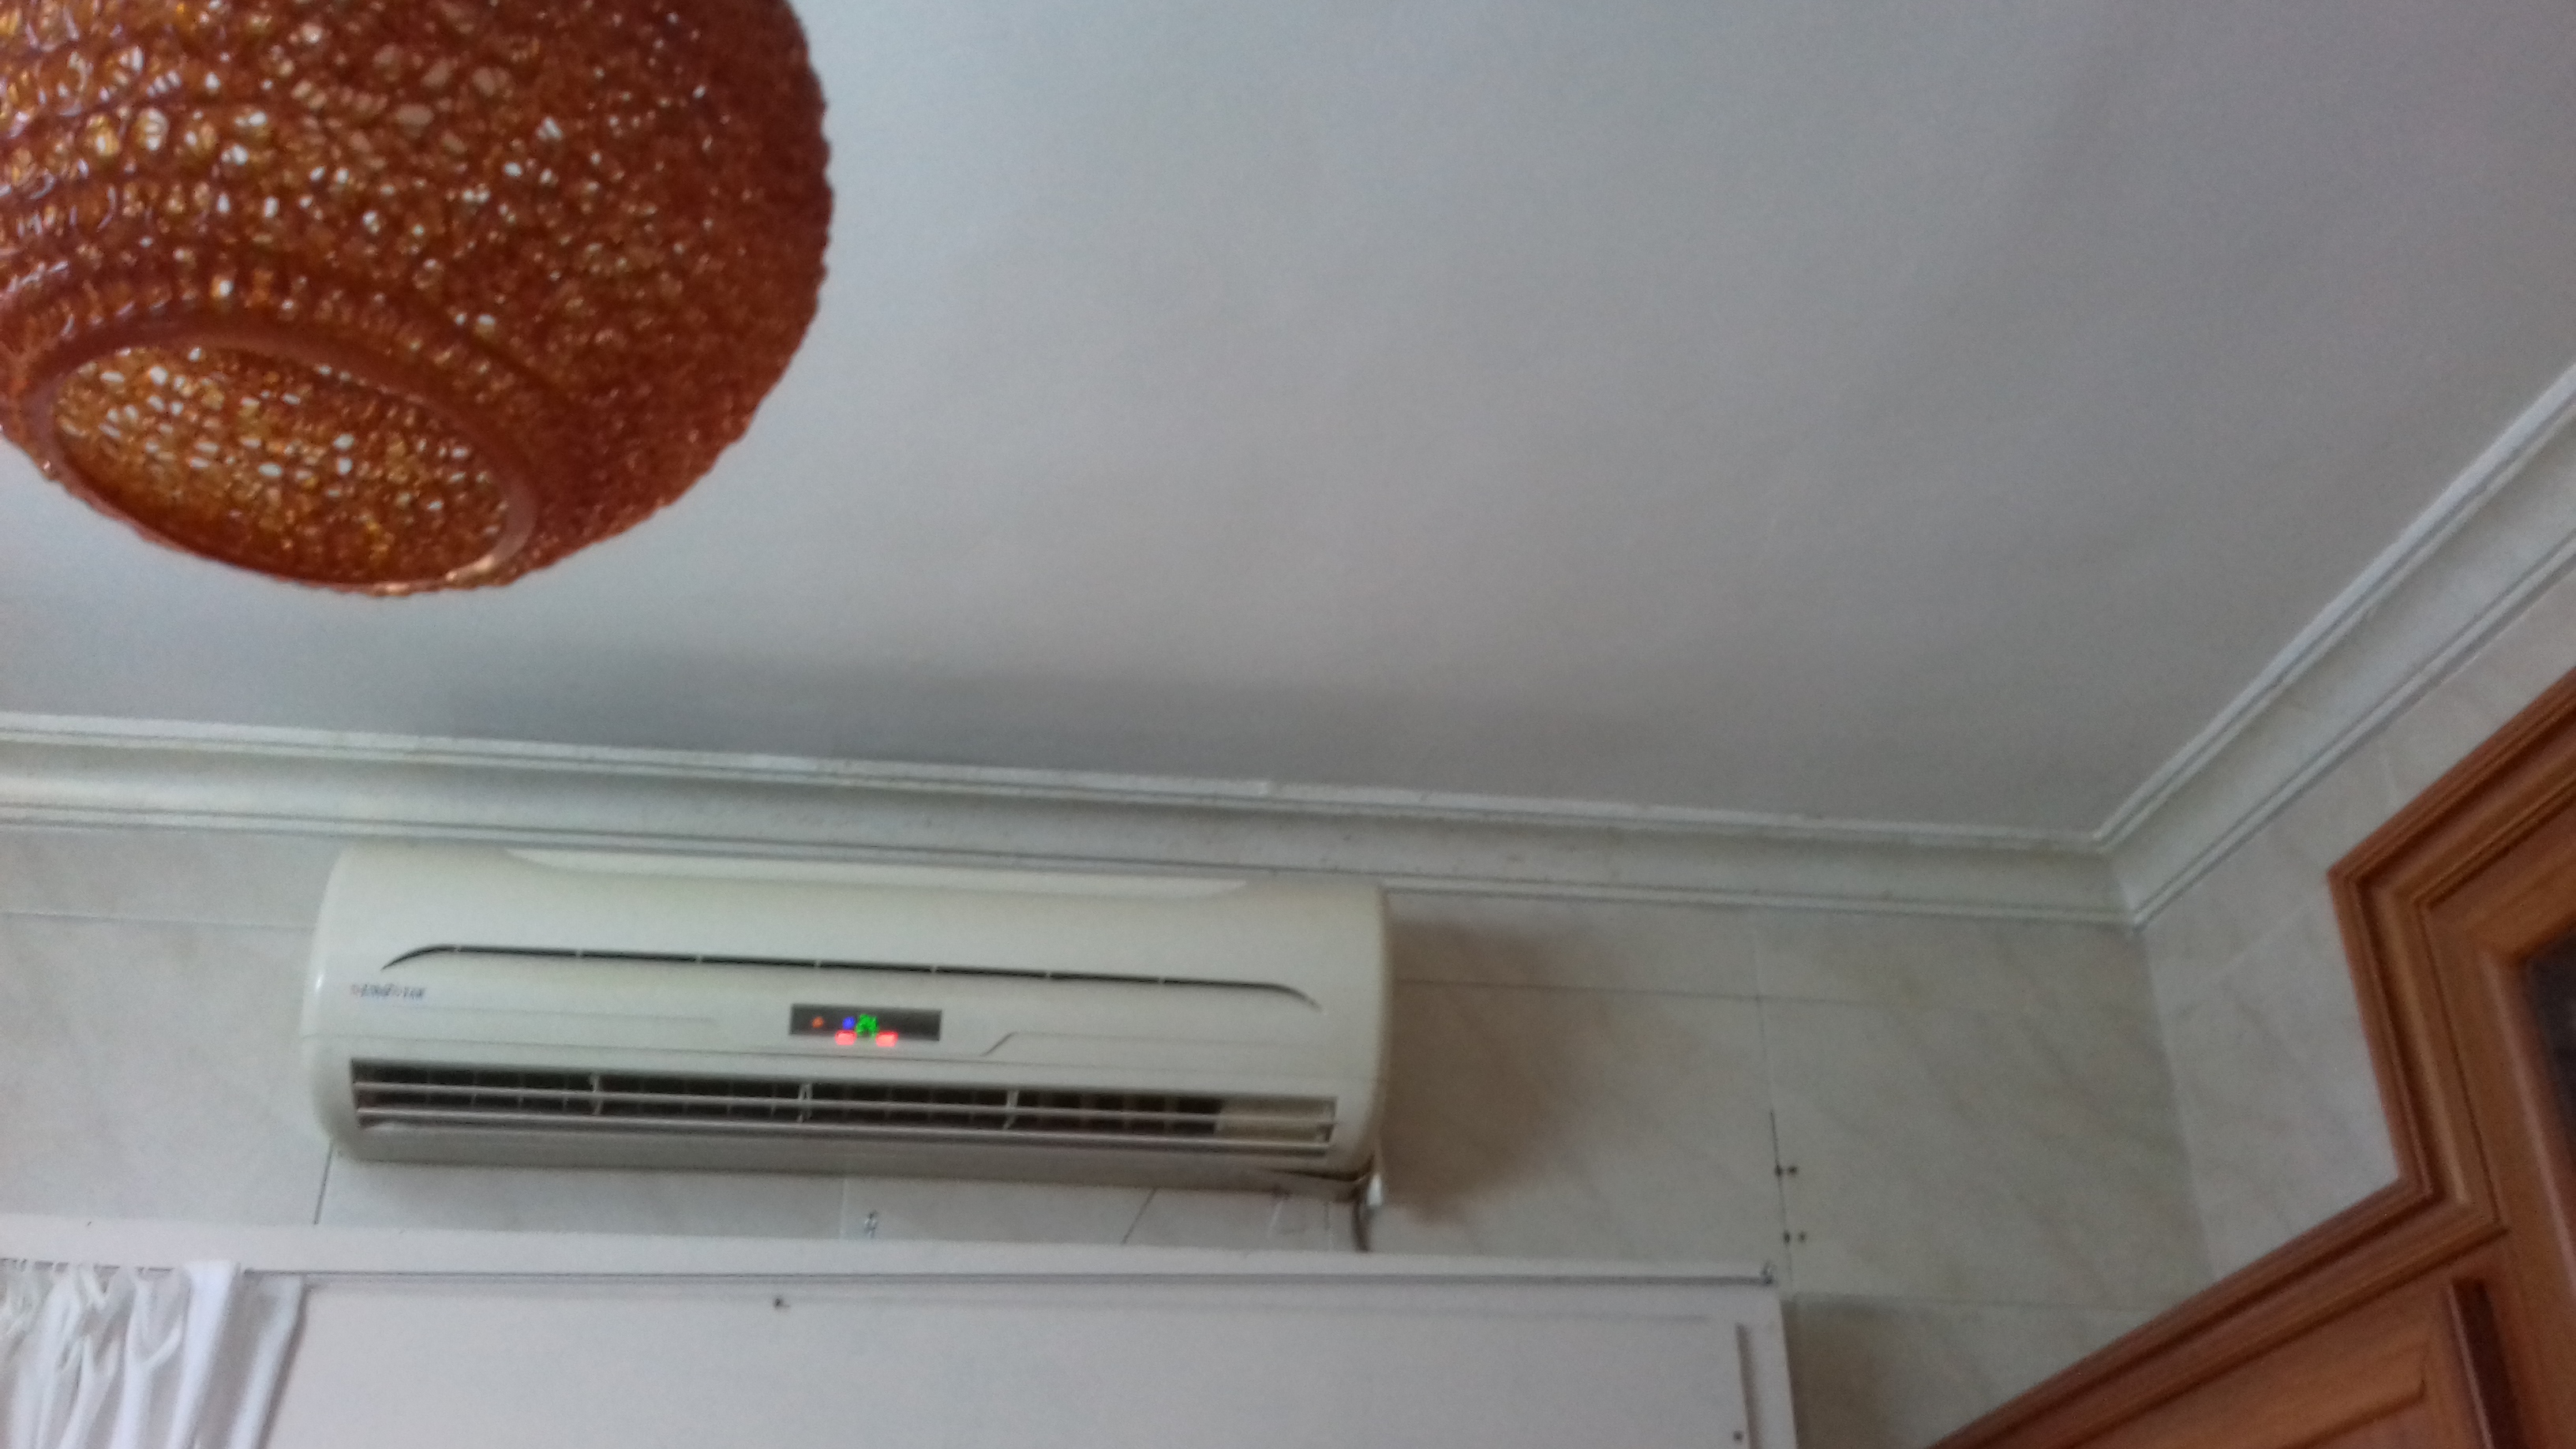 Air Conditioning & General Maintenance at cheap cost. Call / WhatsApp at 055-5269352 / 050-5737068FREE Inspection, Annual Contract, Discounts & Quotatio-  مكيف 1.5 طن نوع نيو ستار...